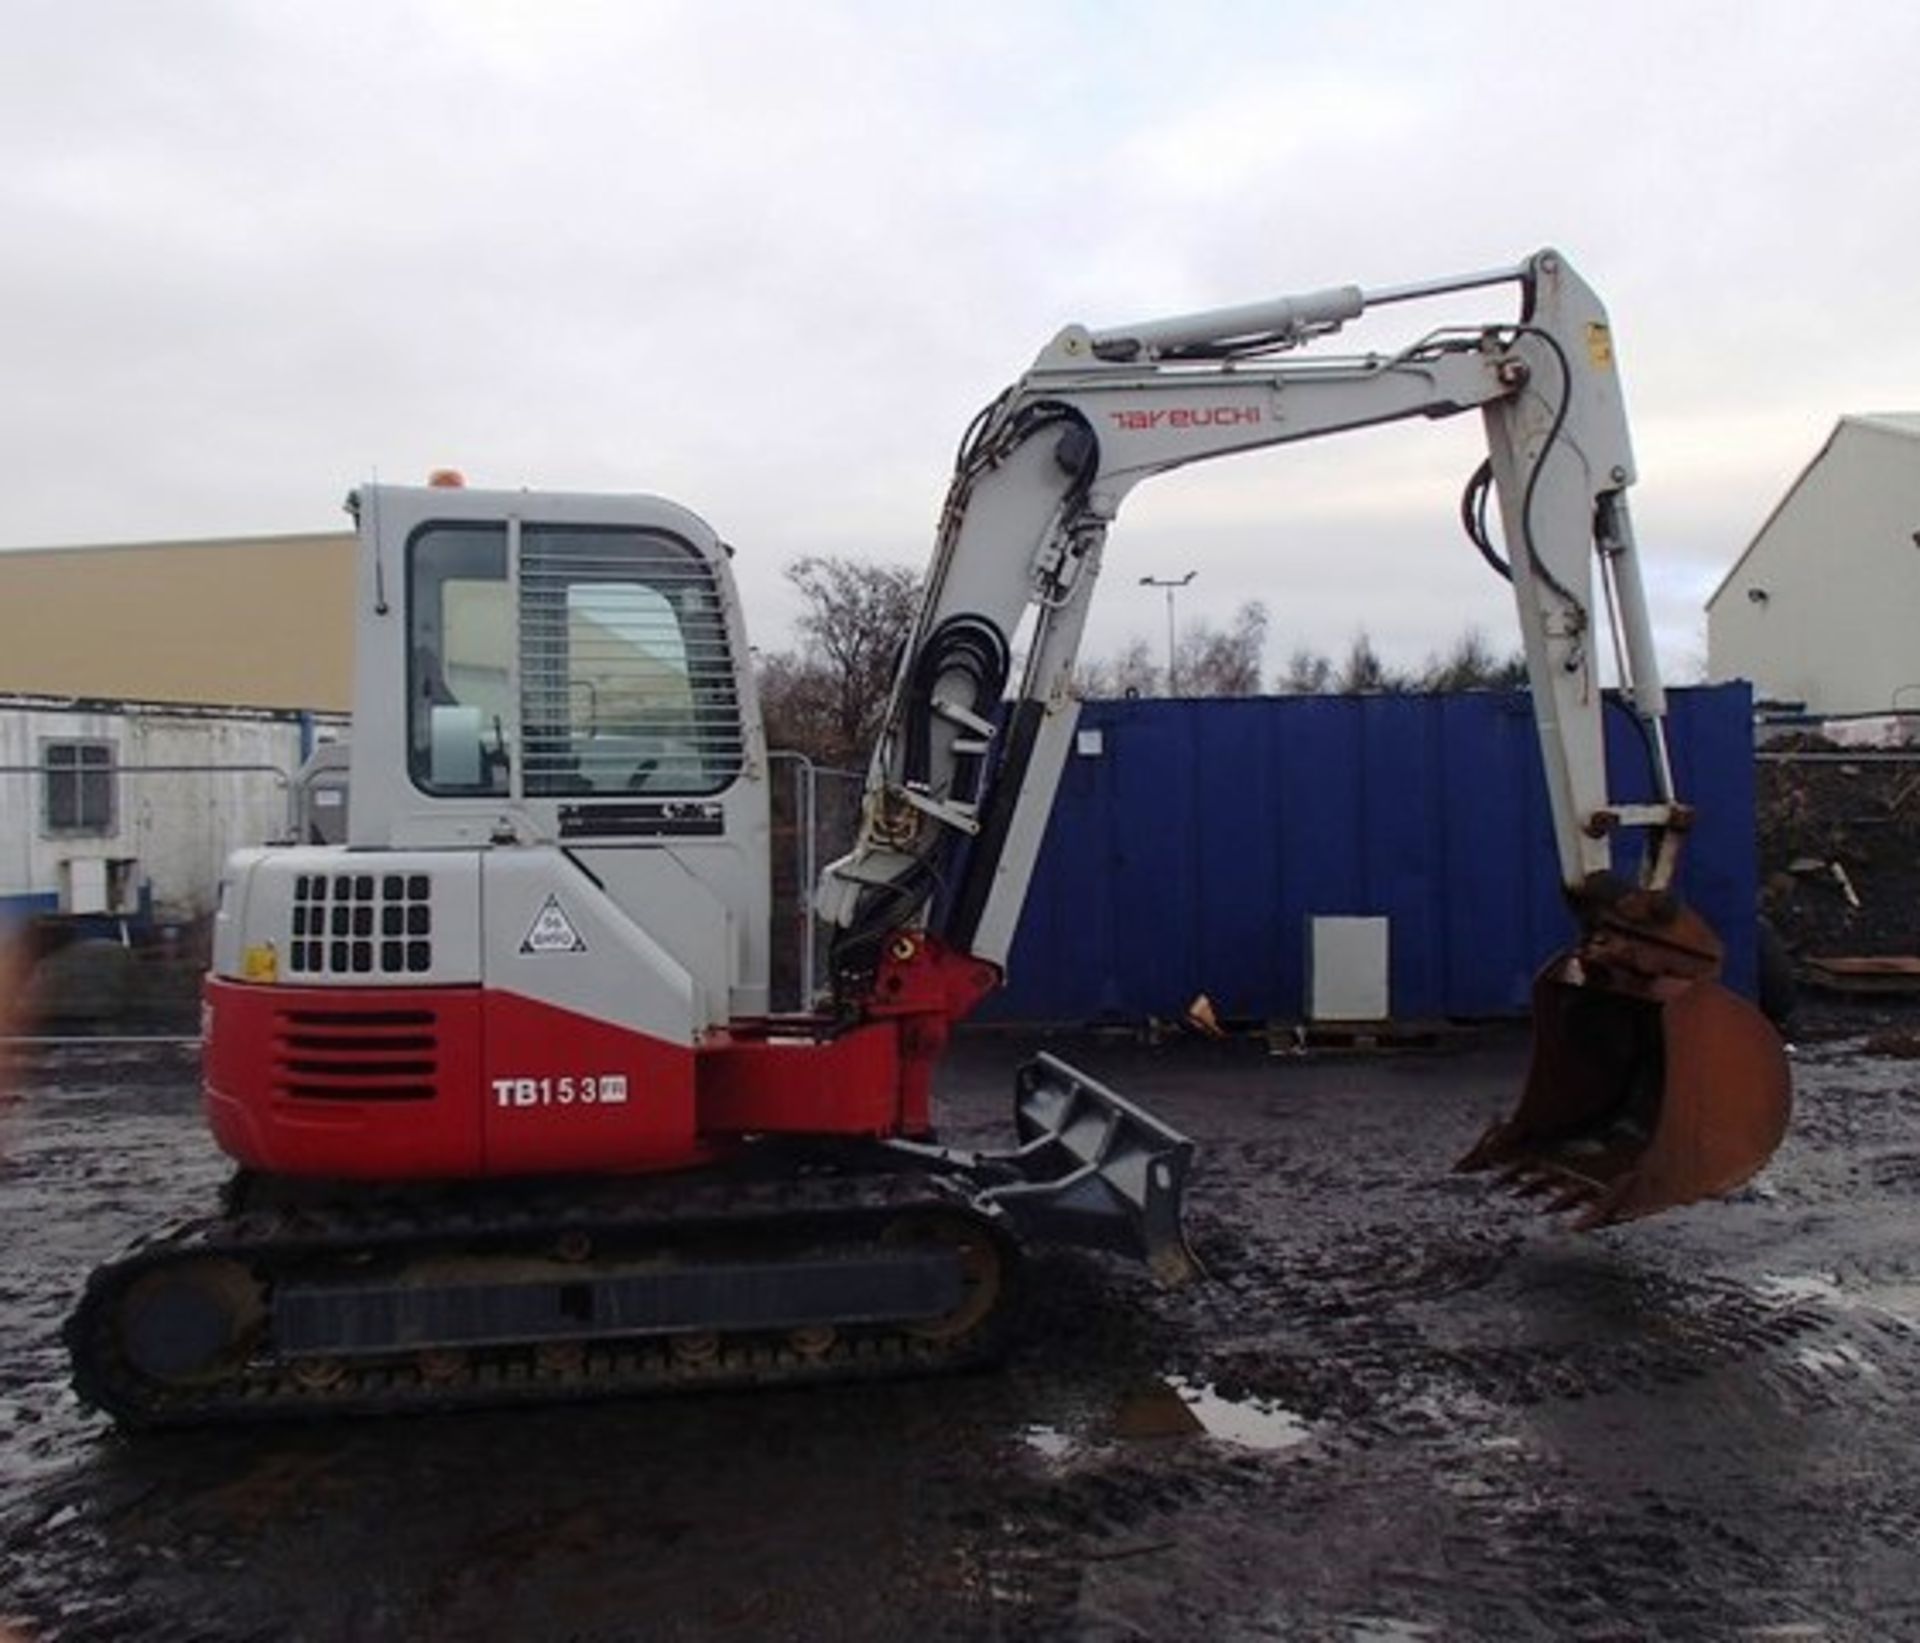 2013 TAKEUCHI TB153FR EXCAVATOR, SN 158301909, 4405 HOURS (NOT VERIFIED), AUX PIPE WORK, HYDRAULIC - Image 8 of 13